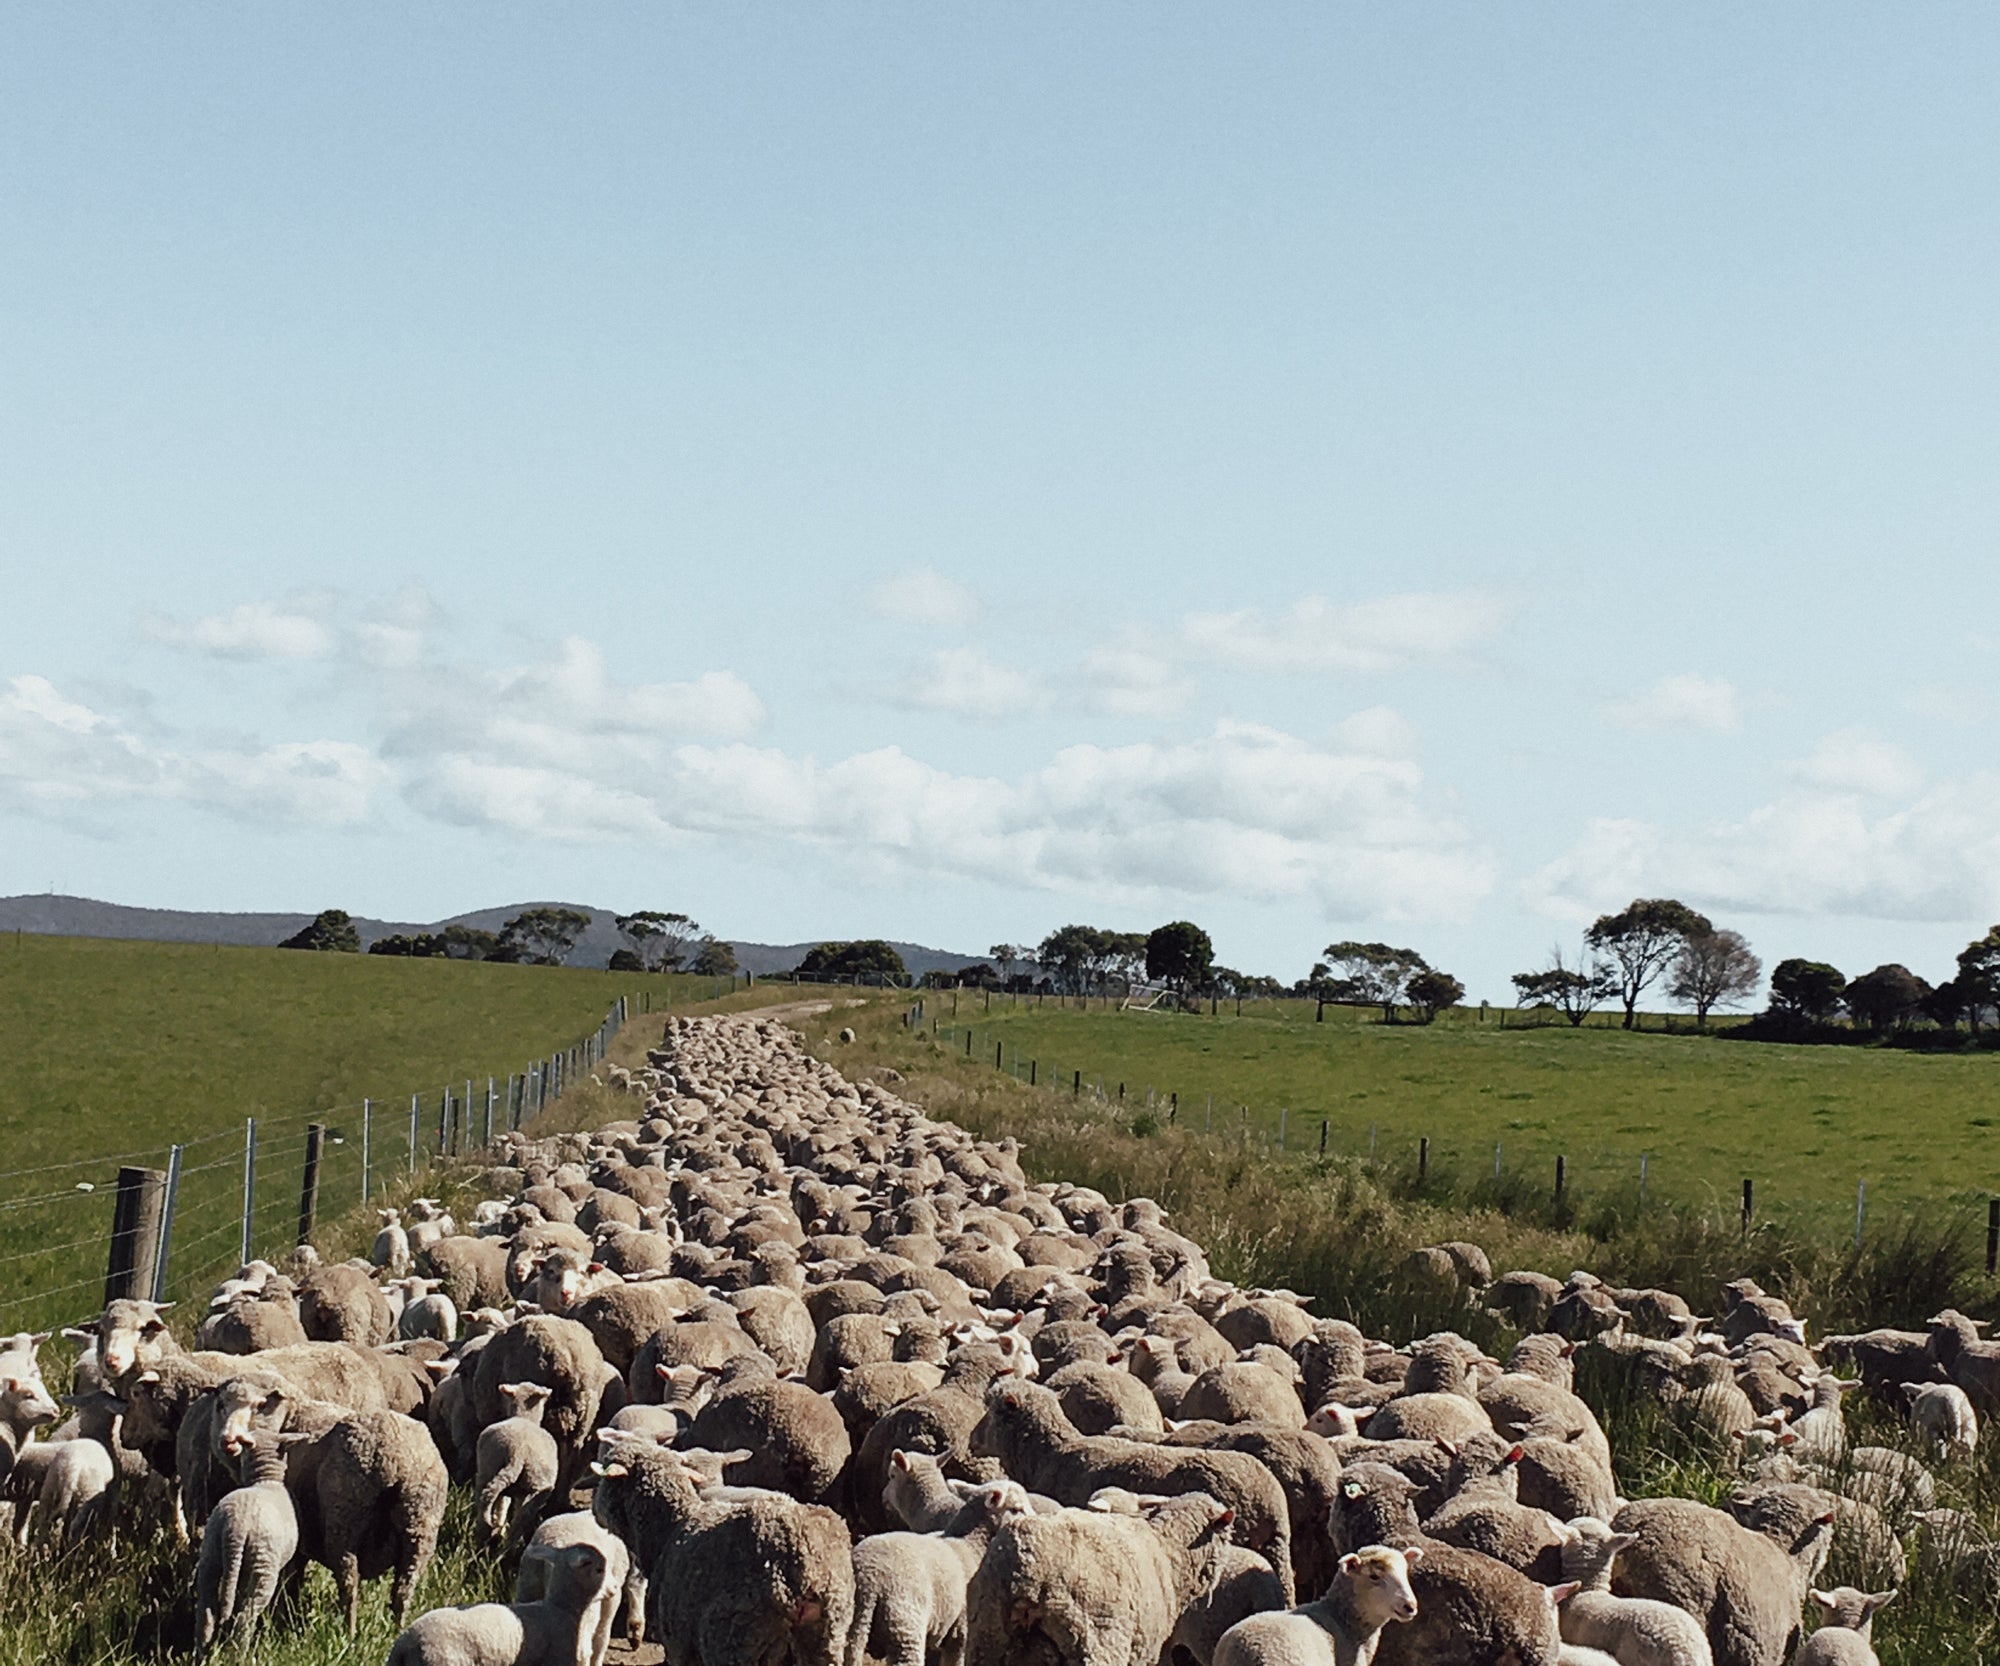 A flock of cormo sheep on the Cooper's property on a clear day.